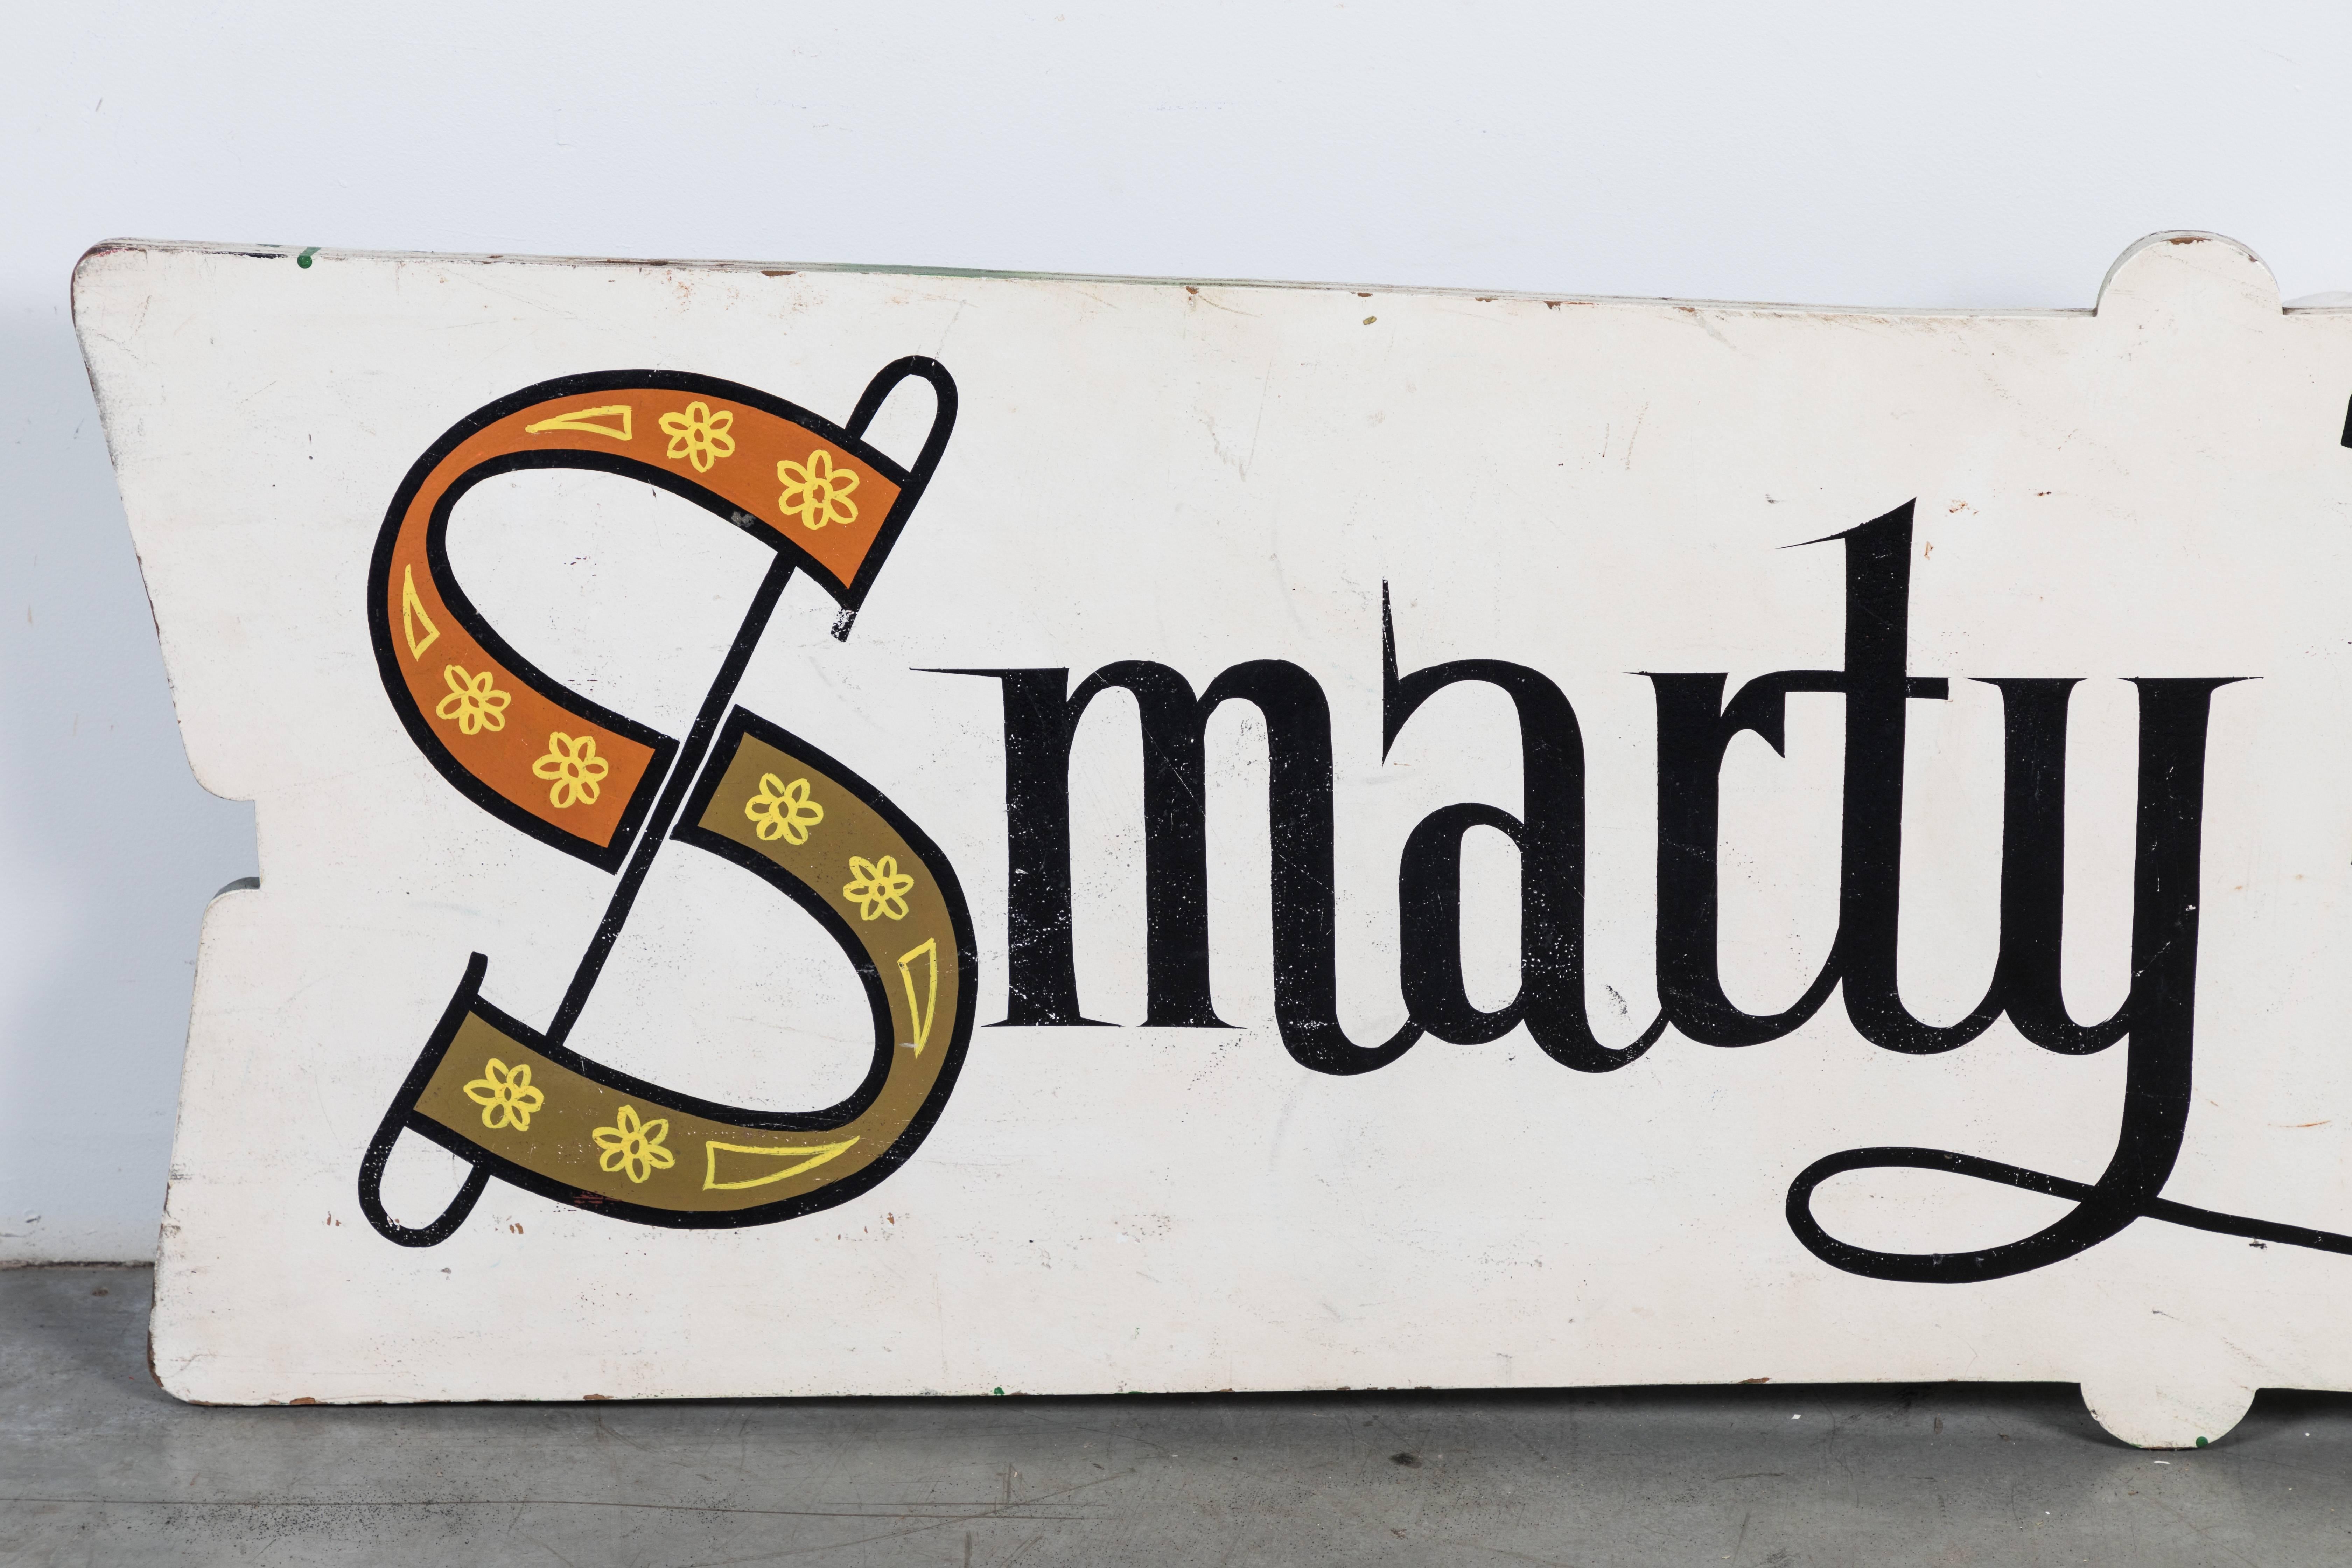 Smarty Pants For Her! Midcentury American Folk Art trade sign from a dress shop. Measures 5 feet 6 inches long by 1 foot 8 inches wide. 